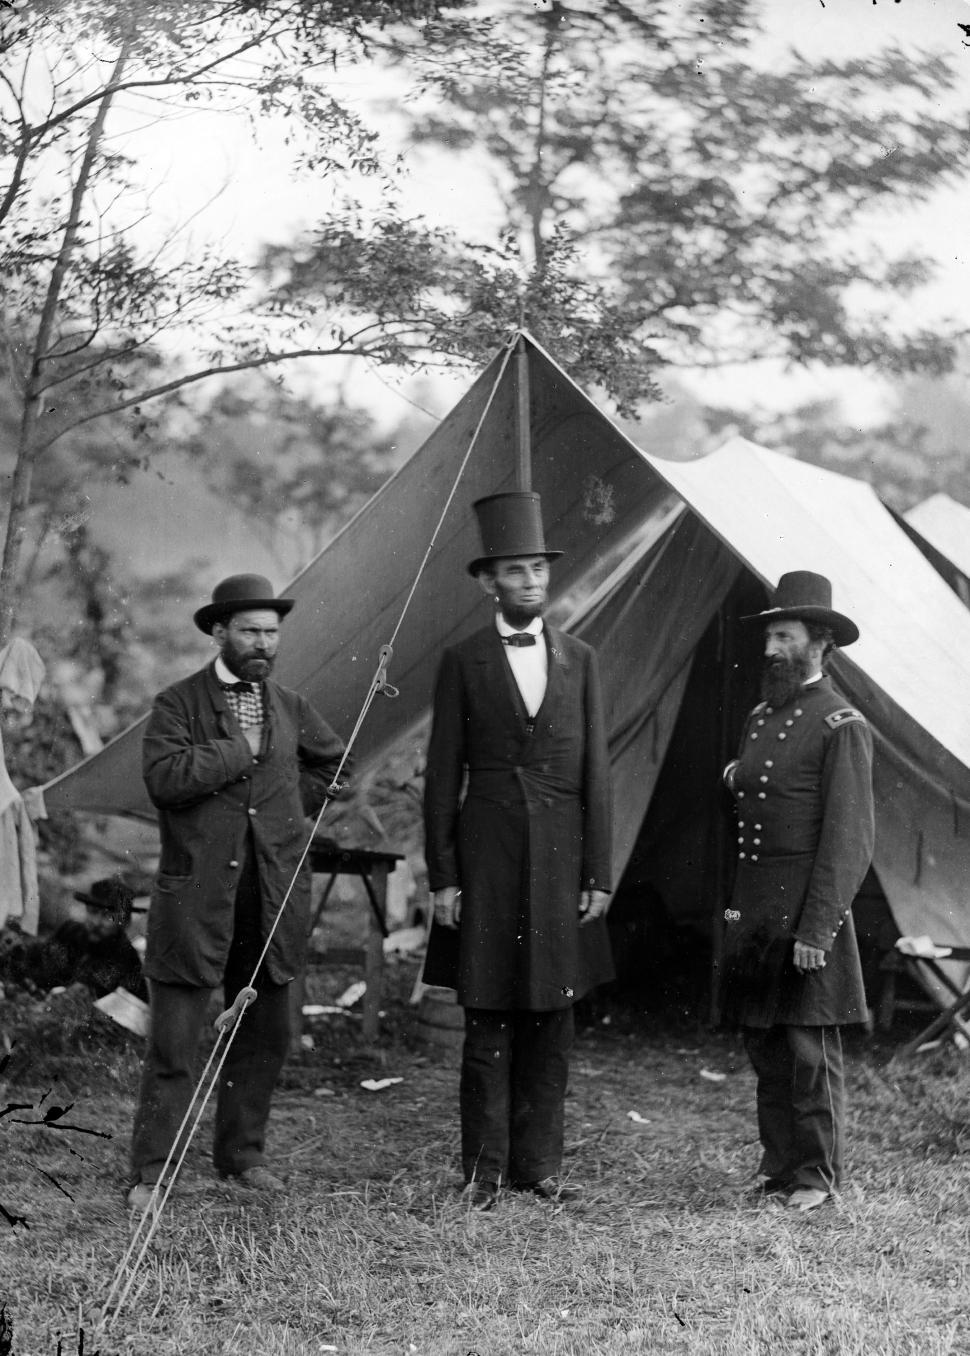 Free Image of Group of Men Standing in Front of a Tent 